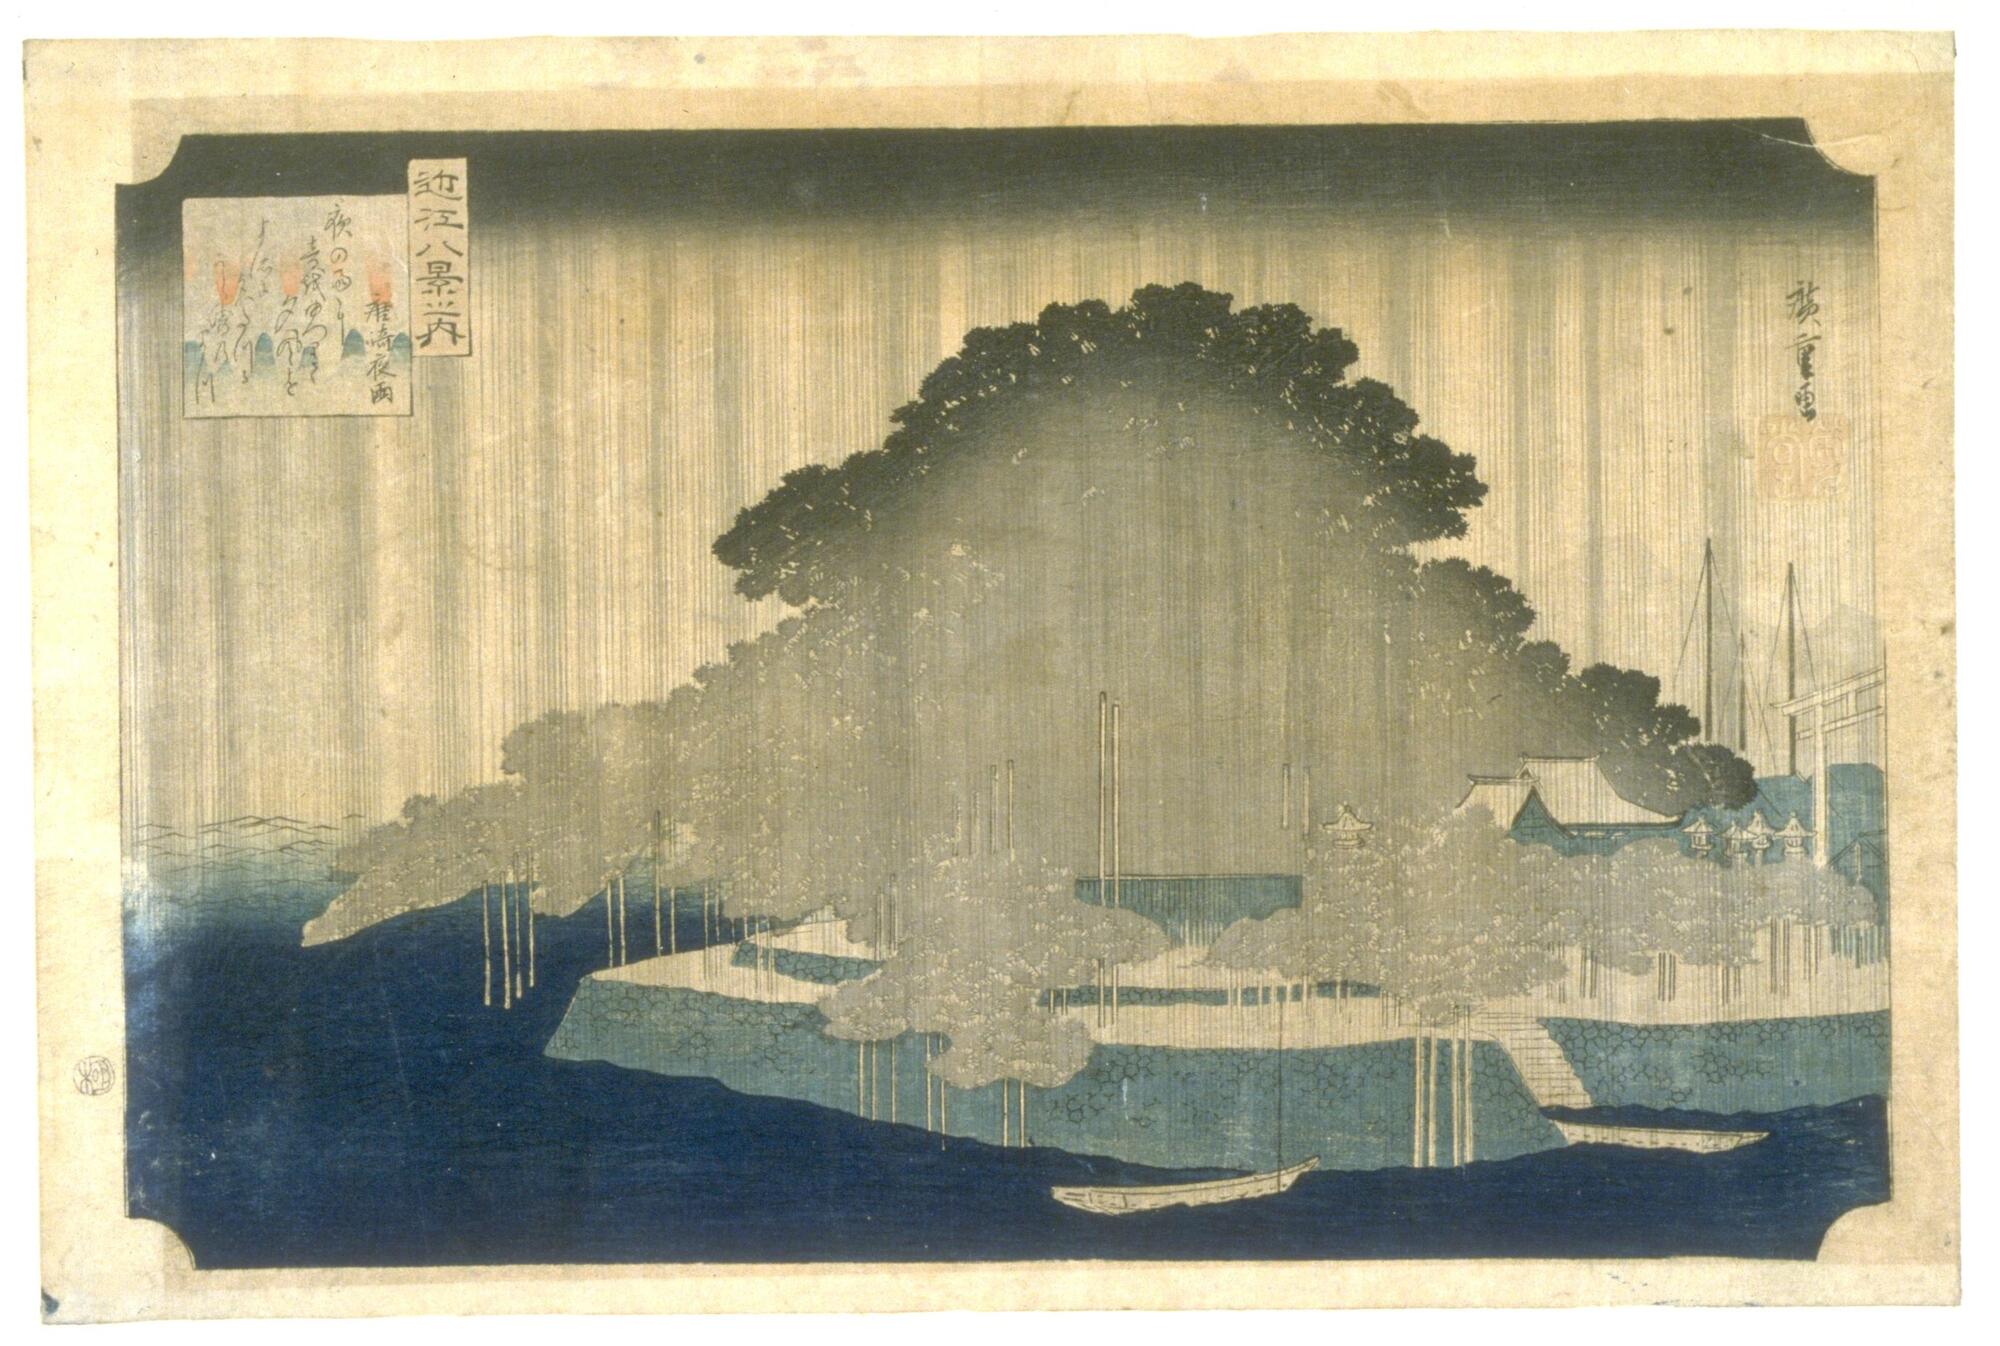 Vertical lines stream downward across the print indicate torrents of rain. The dark color pallette and black strip across the top indicate that the image is set at night.  A giant tree on an island looms over the image, surrounded by water. A poem in the upper left corner reads: <br />"Elsewhere will they talk of the music of the evening breeze<br />that has made the pine of Karasaki famous; the voice of the<br />wind is not heard through the sound of the rain in the night."